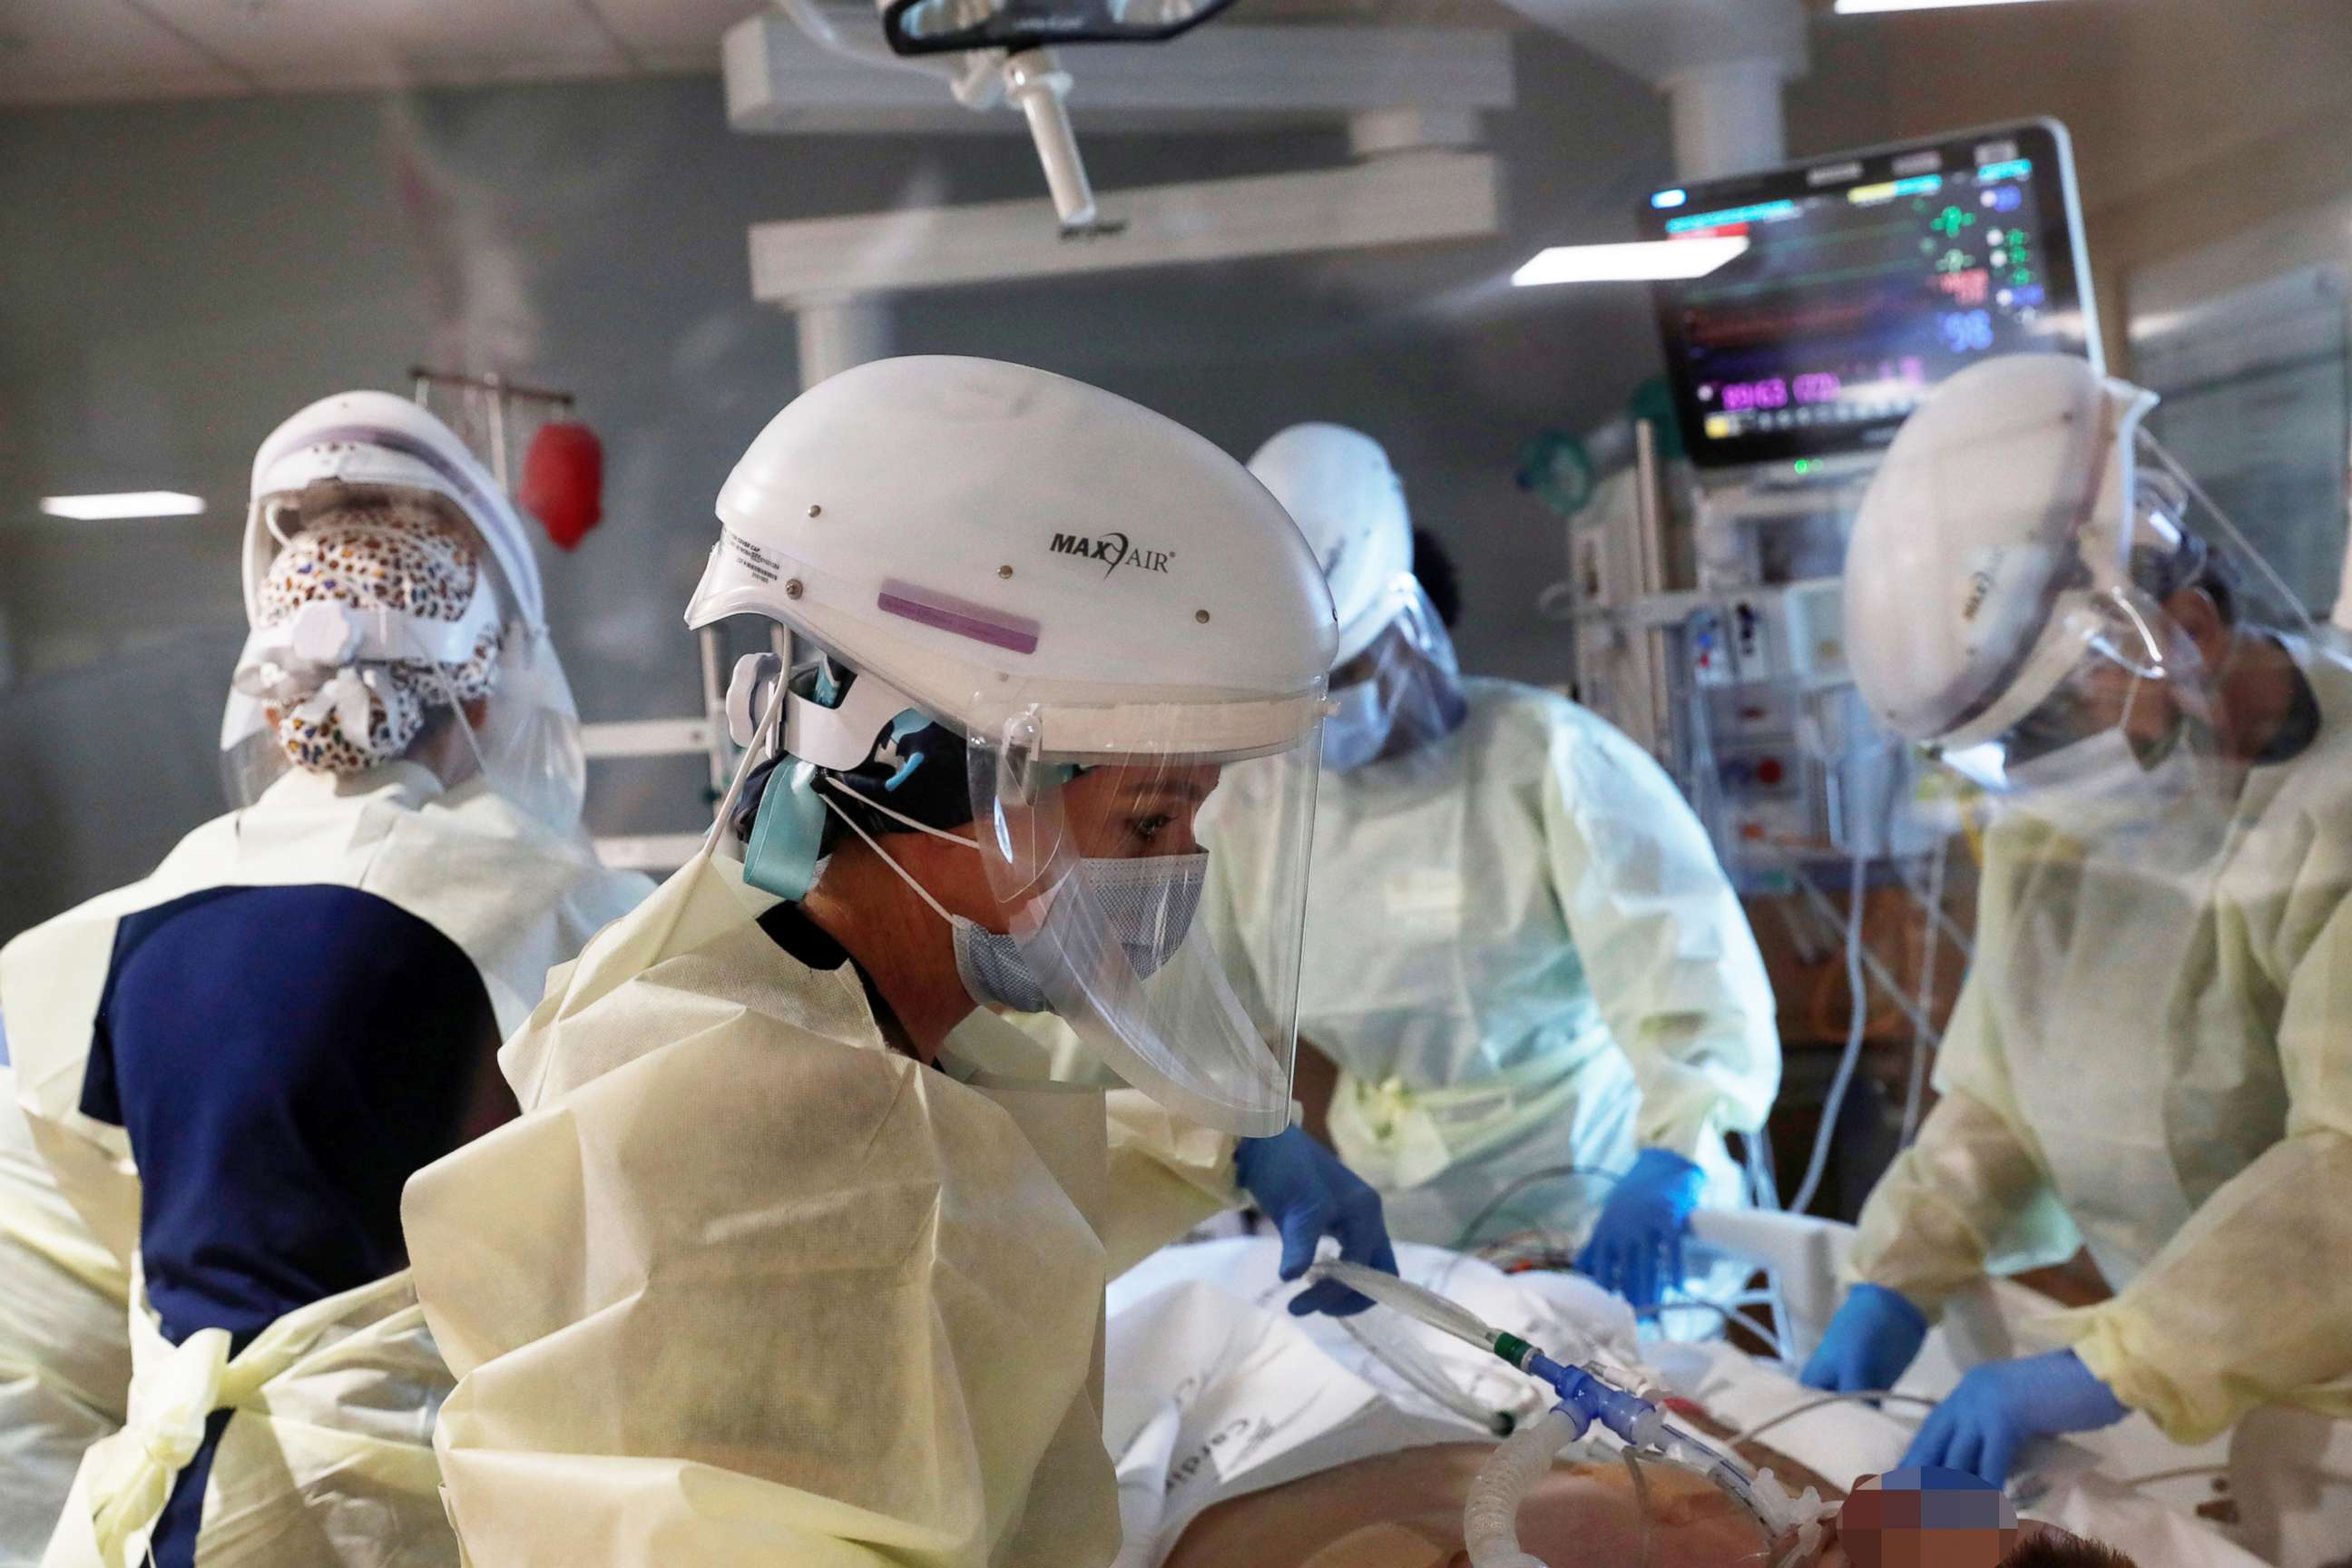 PHOTO: Members of a critical care team treat a COVID-19 positive patient inside his isolation room in the intensive care unit at Sarasota Memorial Hospital in Sarasota, Fla., Sept. 21, 2021.